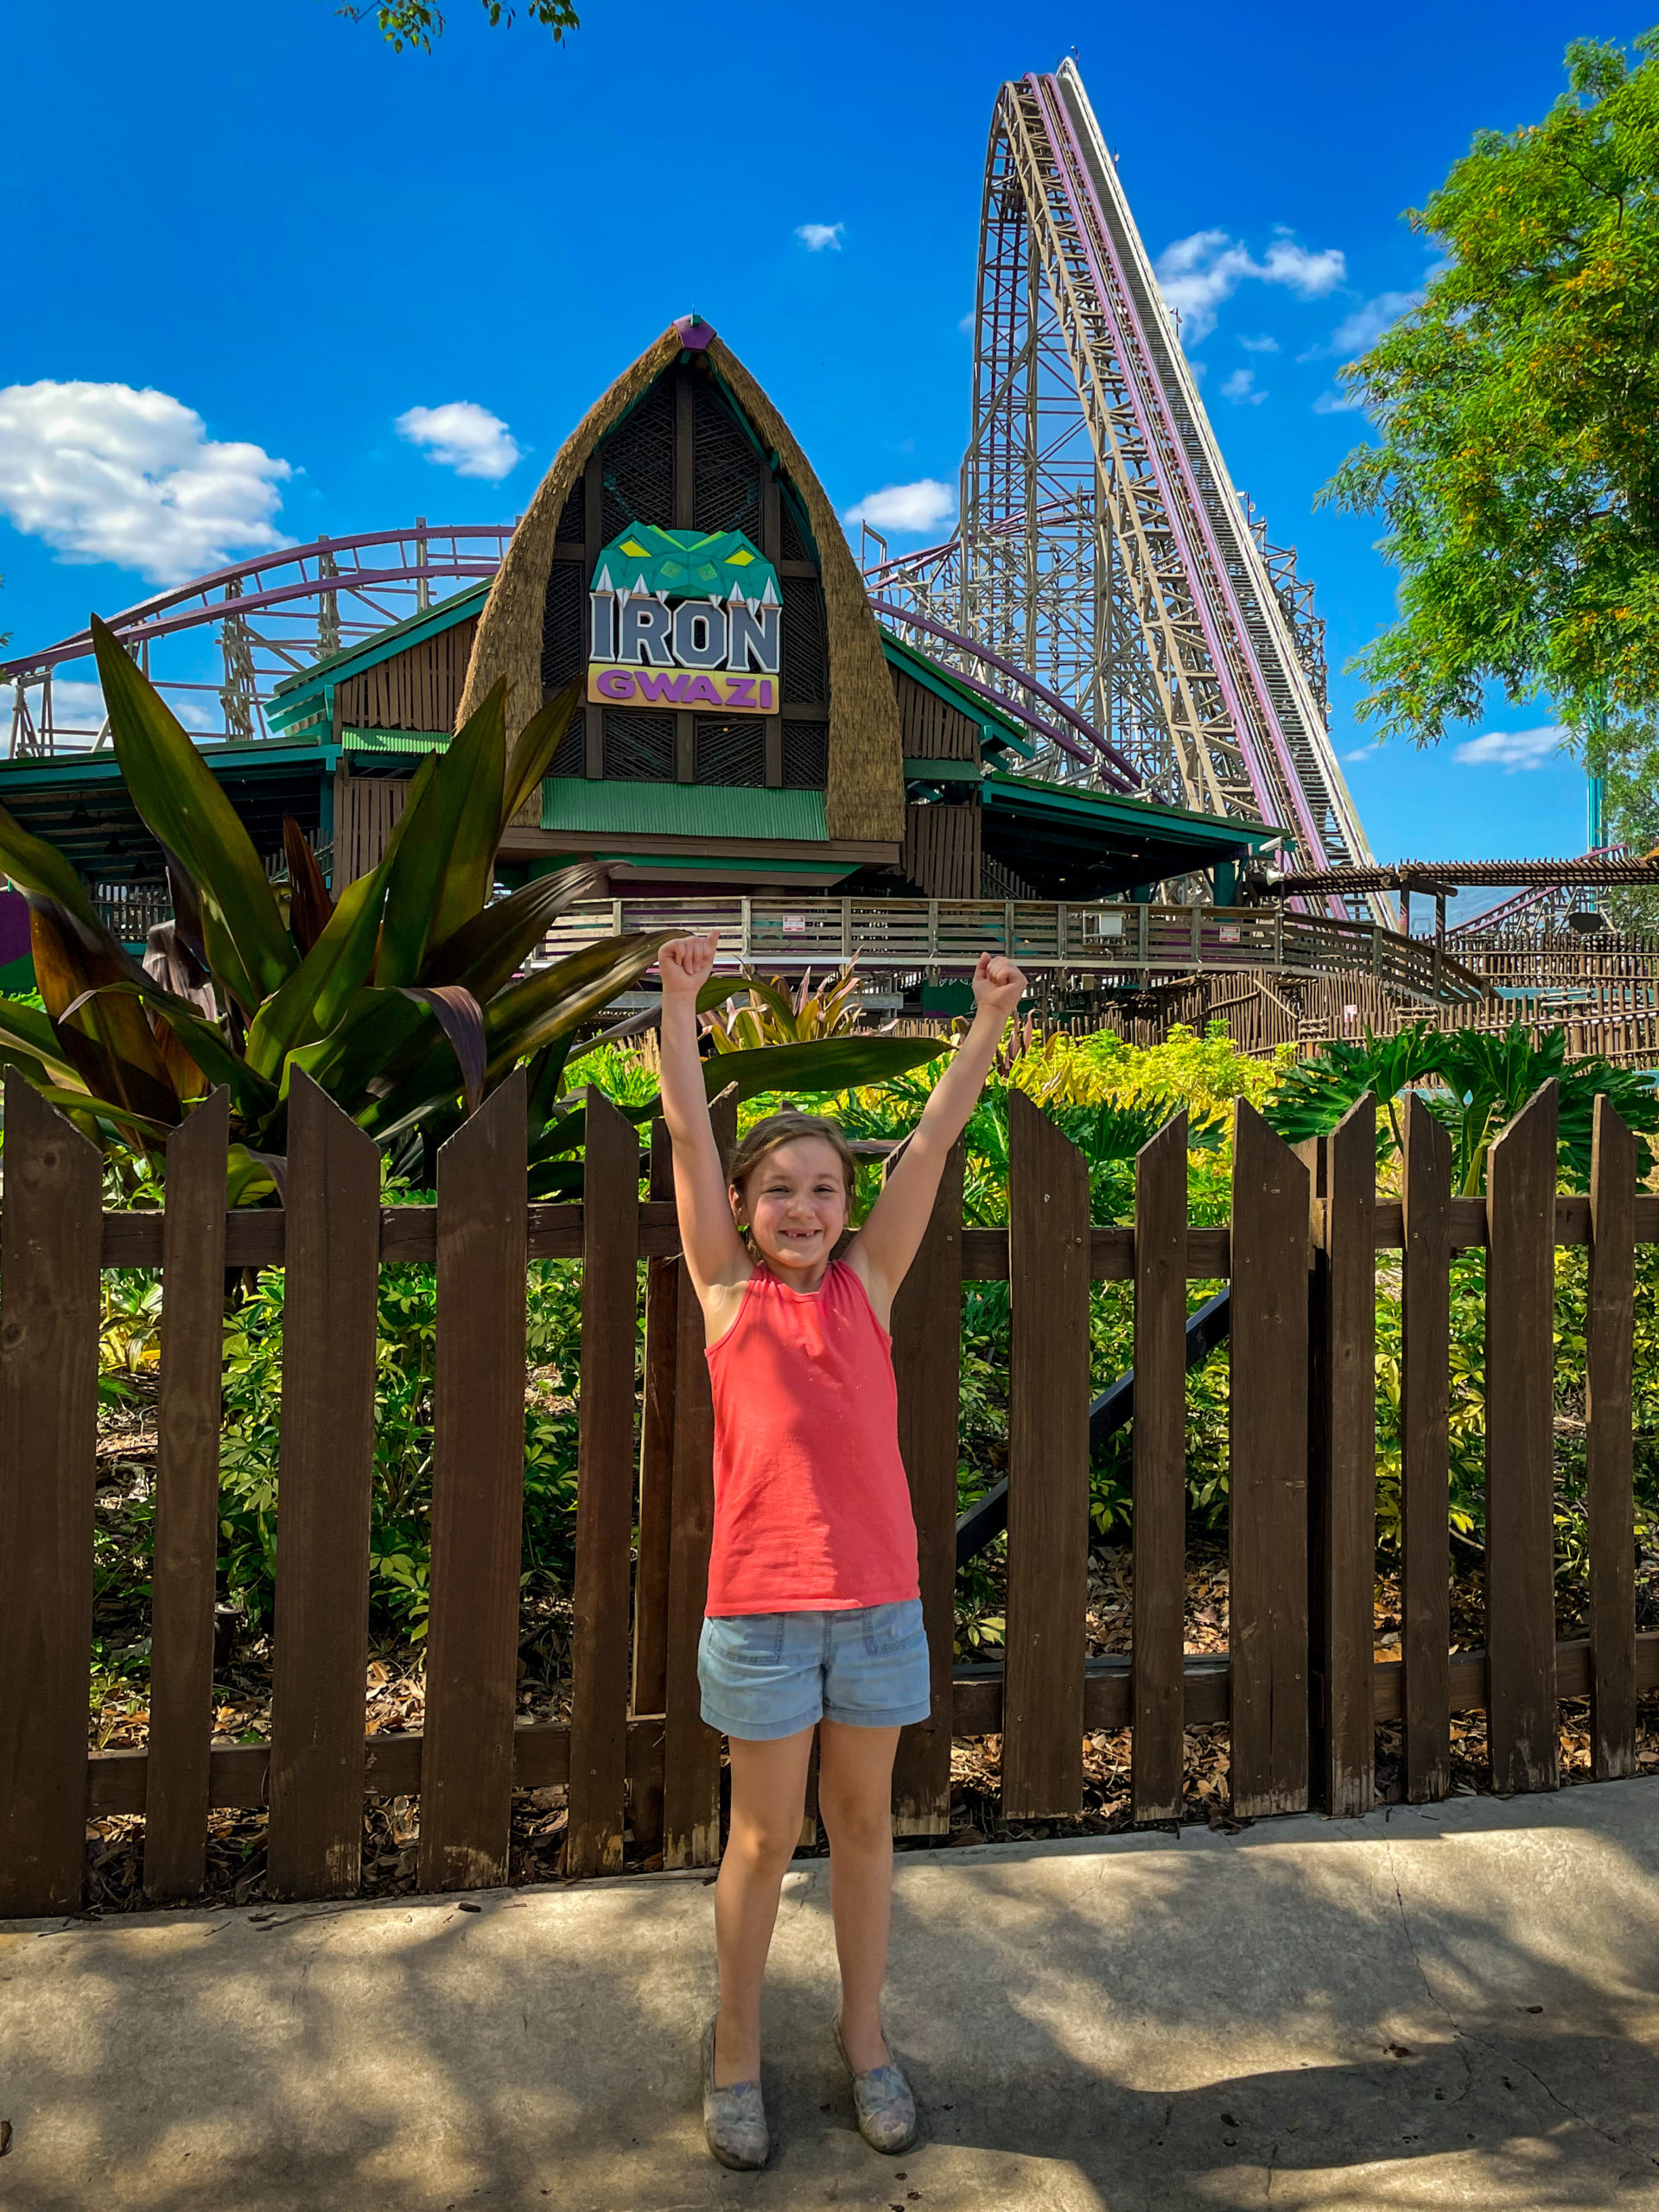 A young girl excitedly puts her hands in the air in front of Iron Gwazi, one of the thrilling rides at Busch Gardens® Tampa Bay.